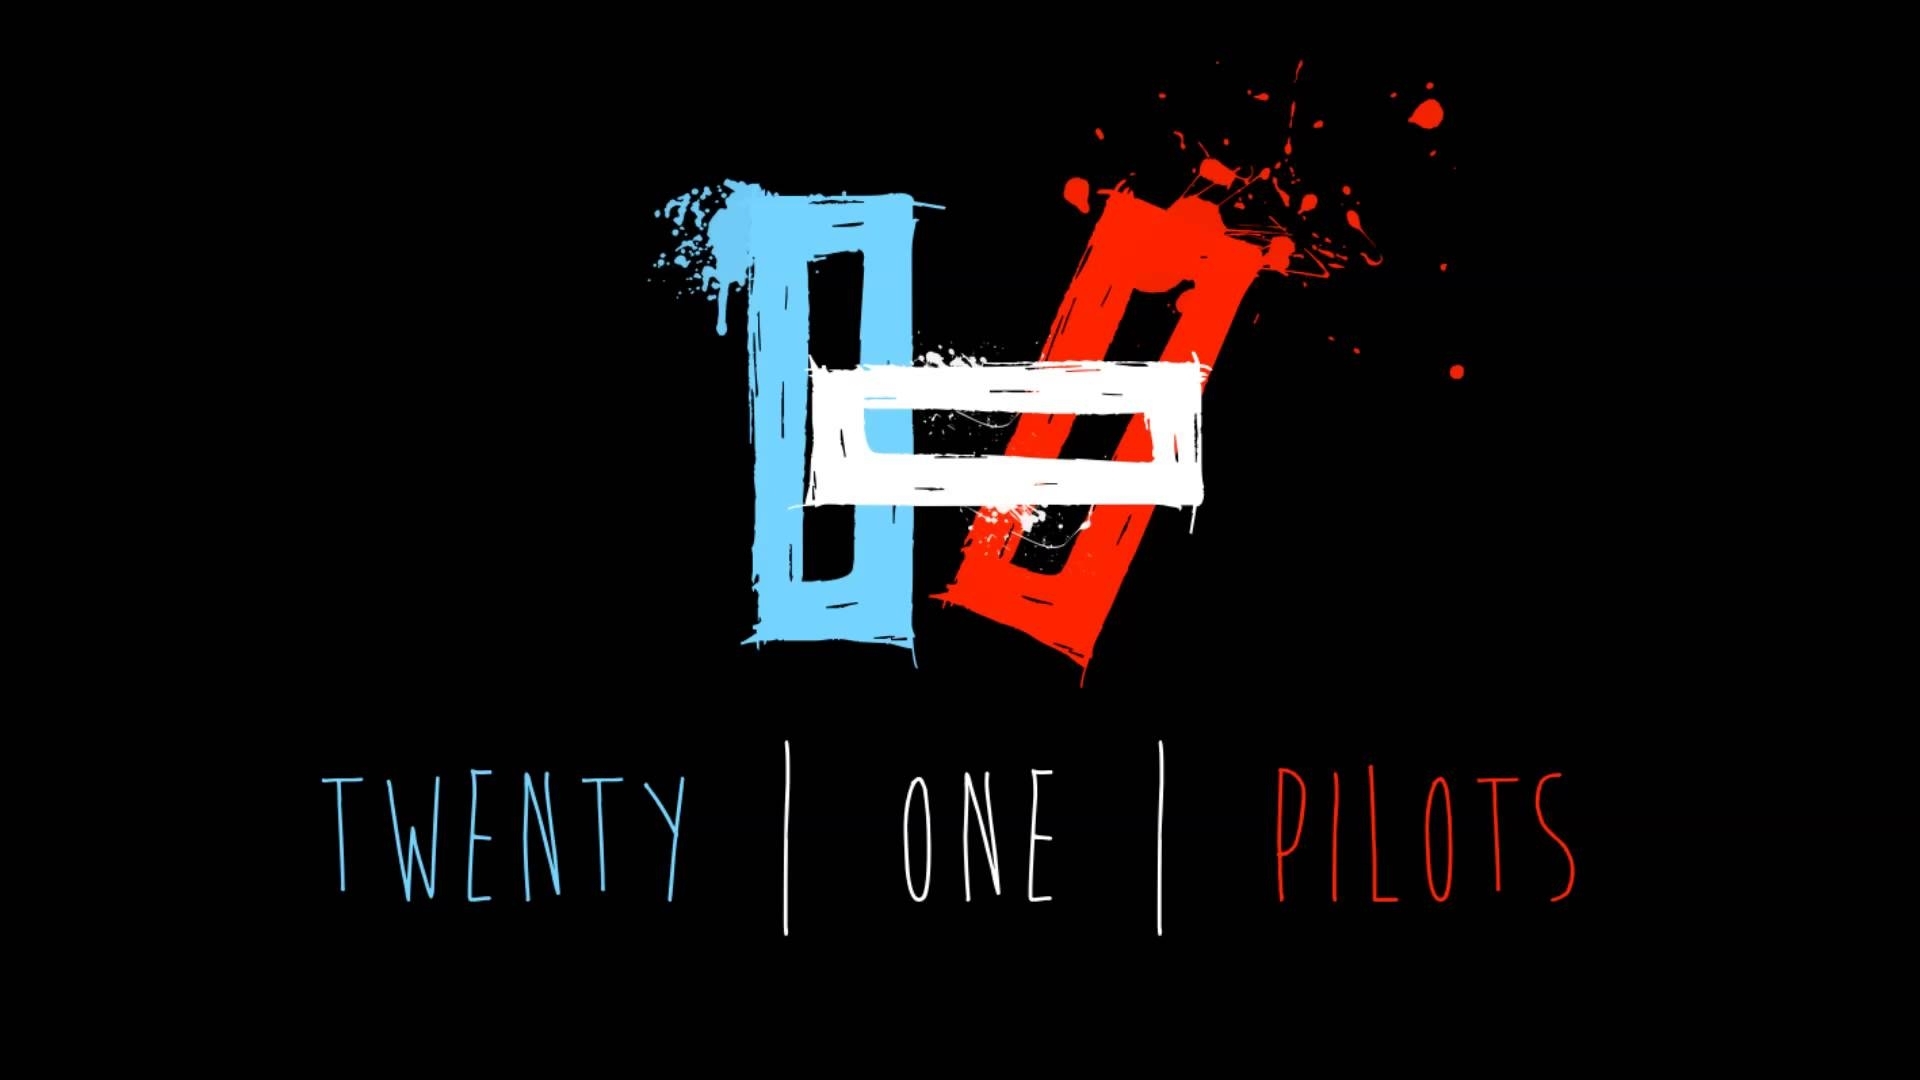 10 Latest Twenty One Pilots Backgrounds FULL HD 1080p For PC Background